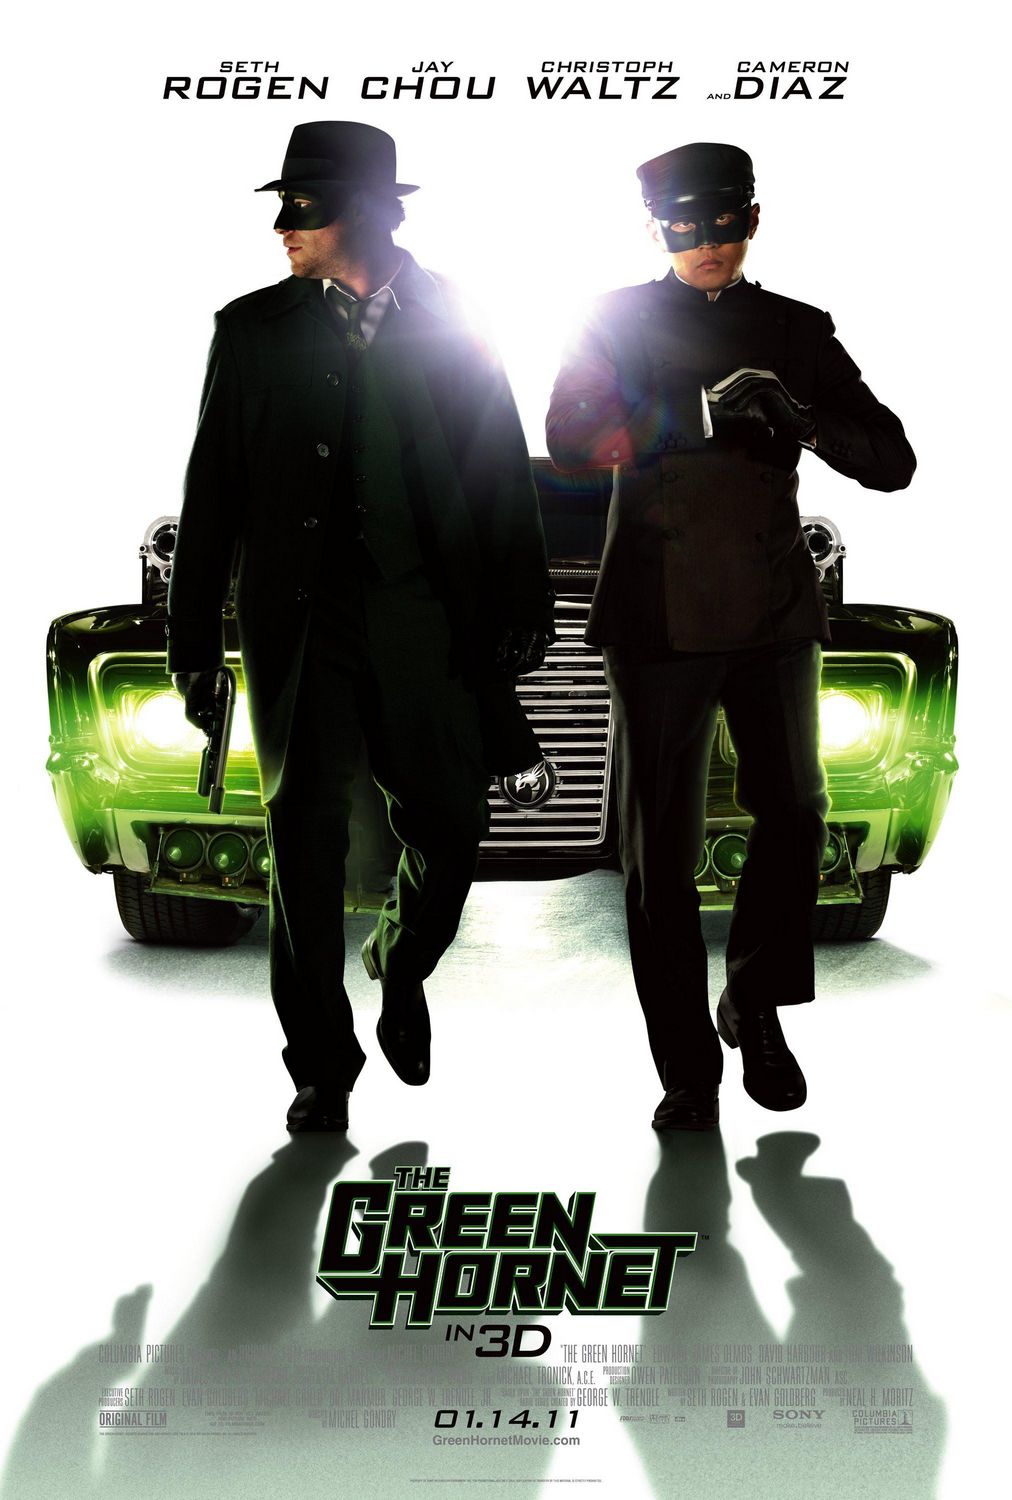 Extra Large Movie Poster Image for The Green Hornet (#5 of 10)